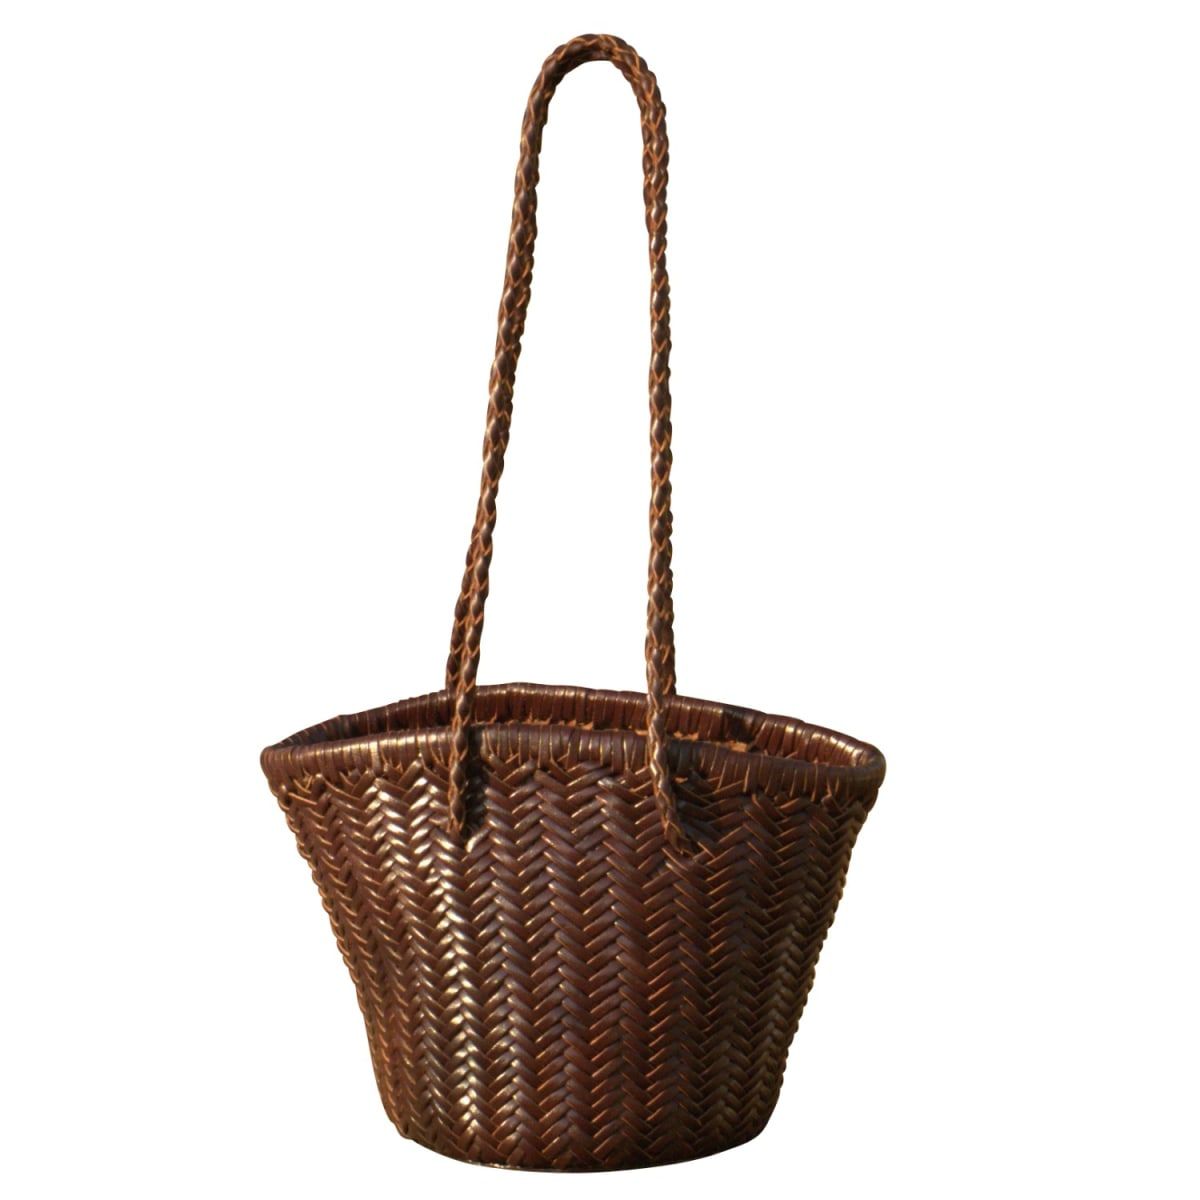 Zigzag Woven Leather Bucket Bag In Small Size ‘Alessandra' - Dark Brown | Wolf and Badger (Global excl. US)